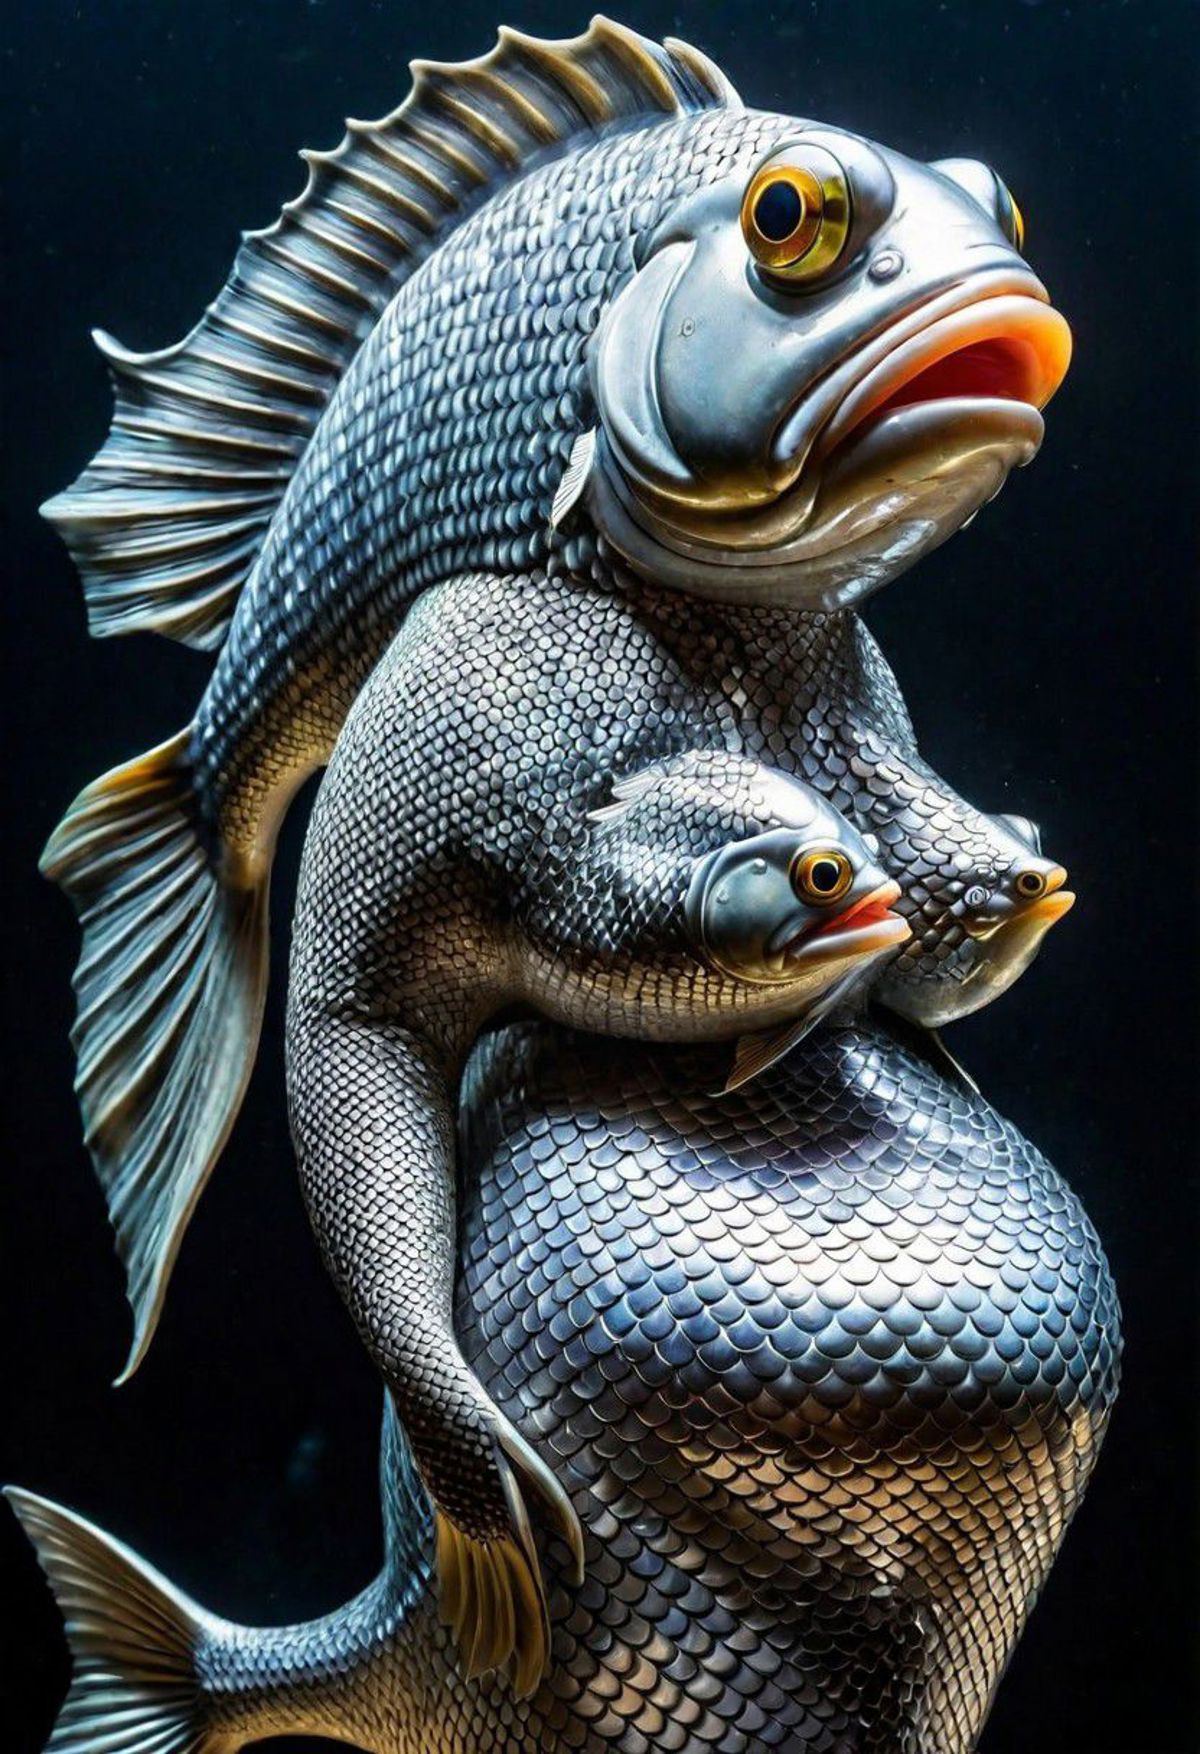 A large fish statue holding two smaller fish.